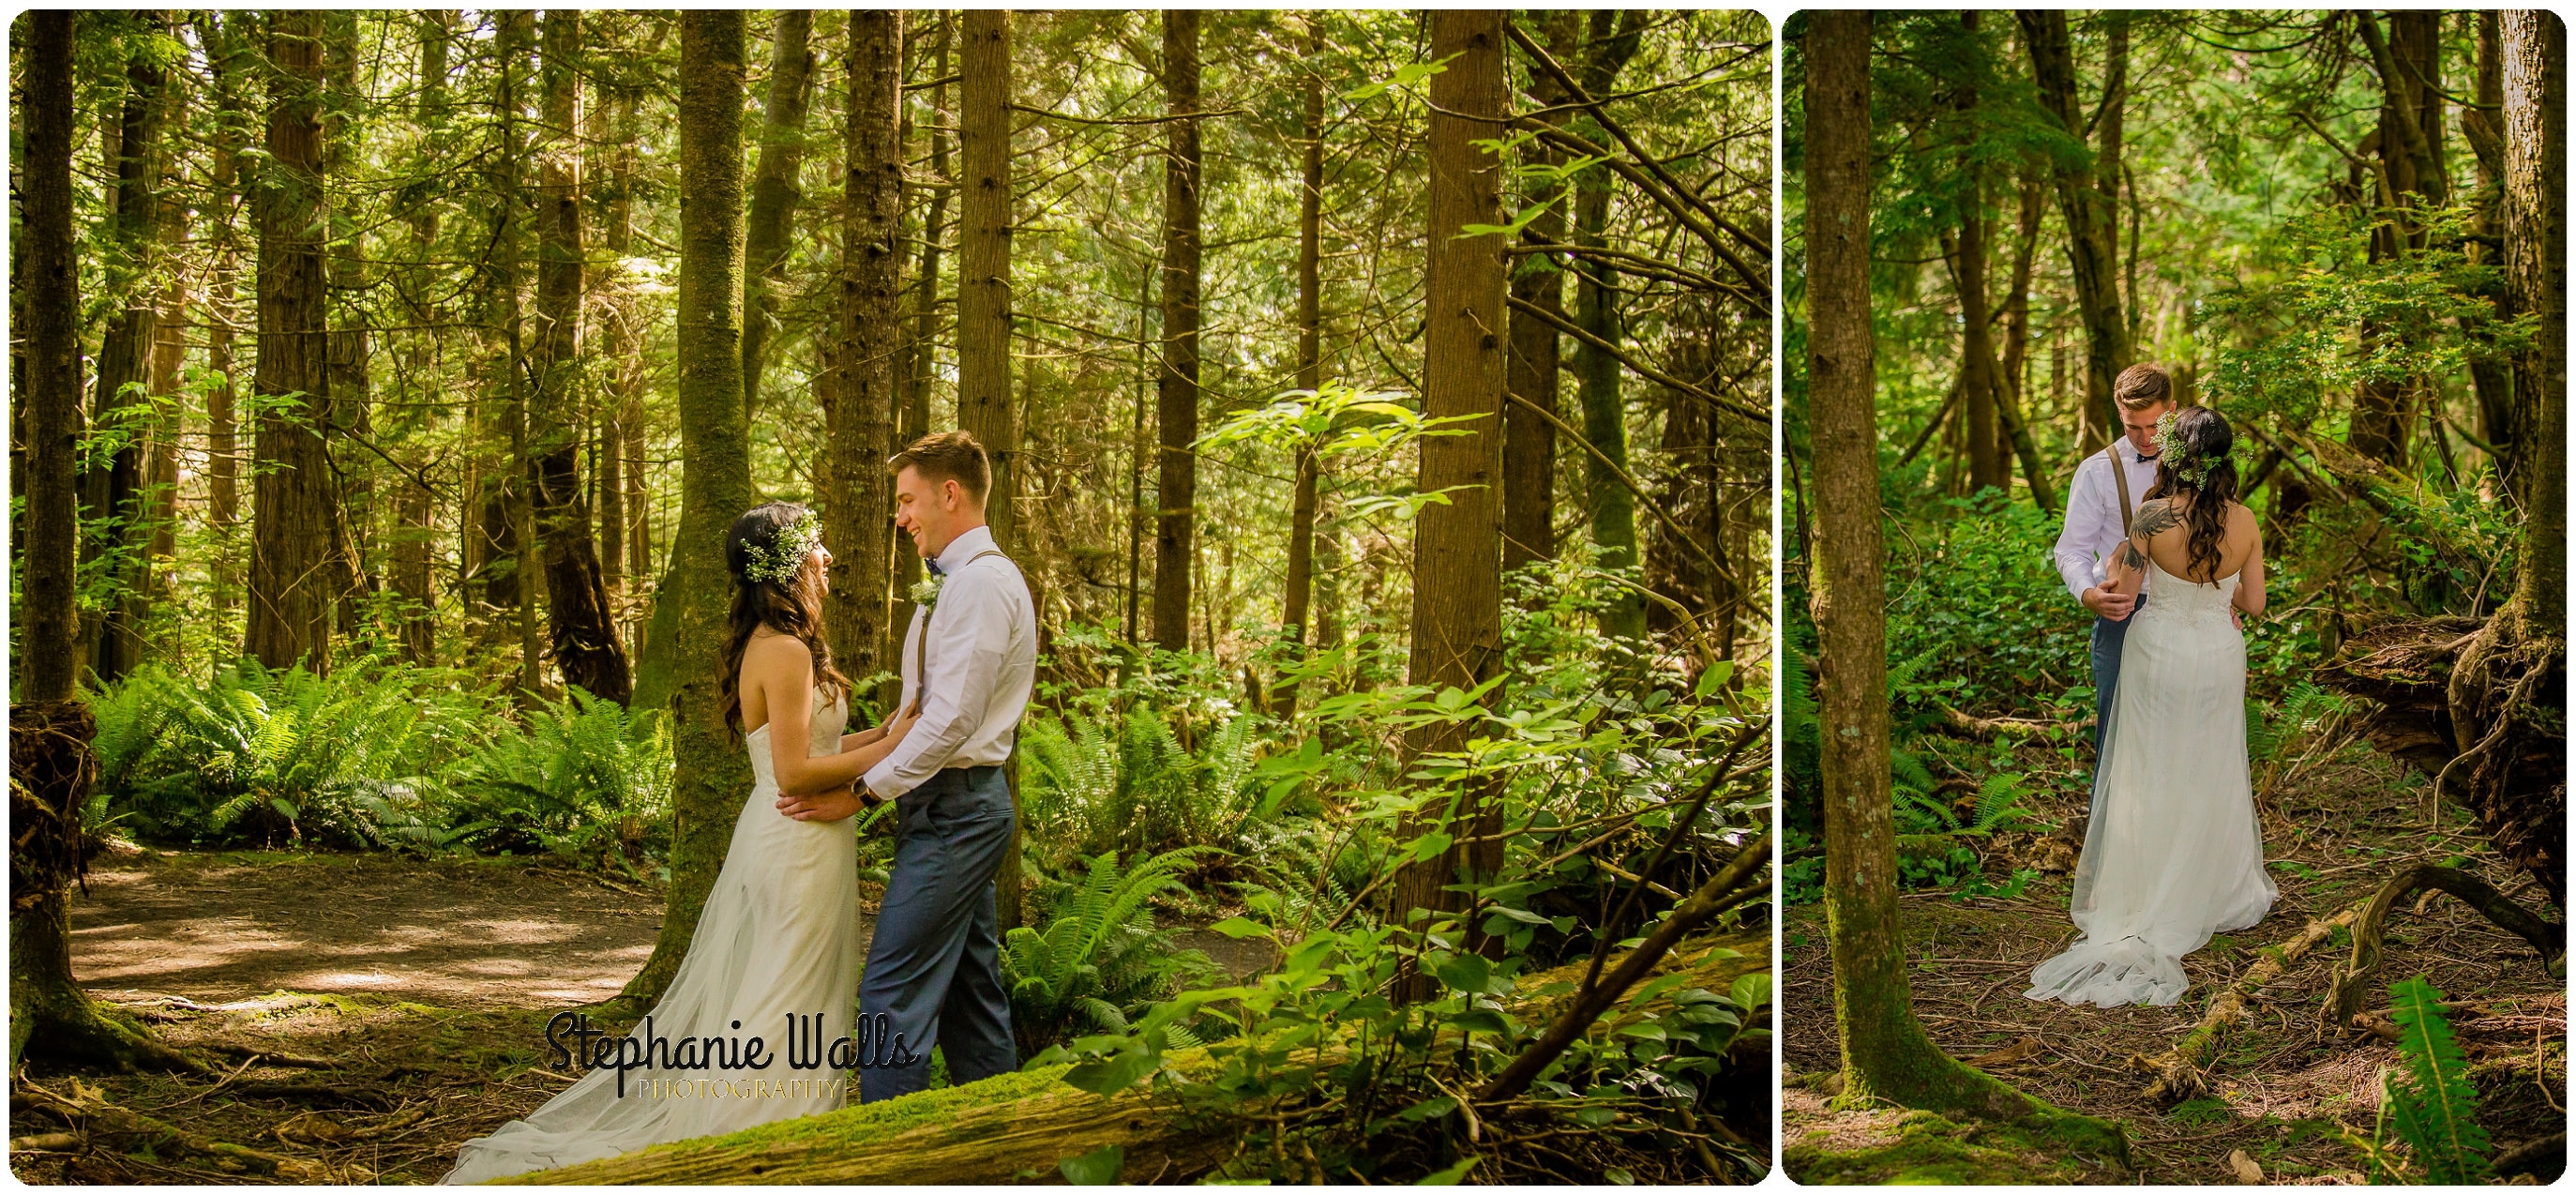 INTIMATE CLIFFSIDE ELOPEMENT | CAPE FLATTERY NEAH BAY | STEPHANIE WALLS PHOTOGRAPHY